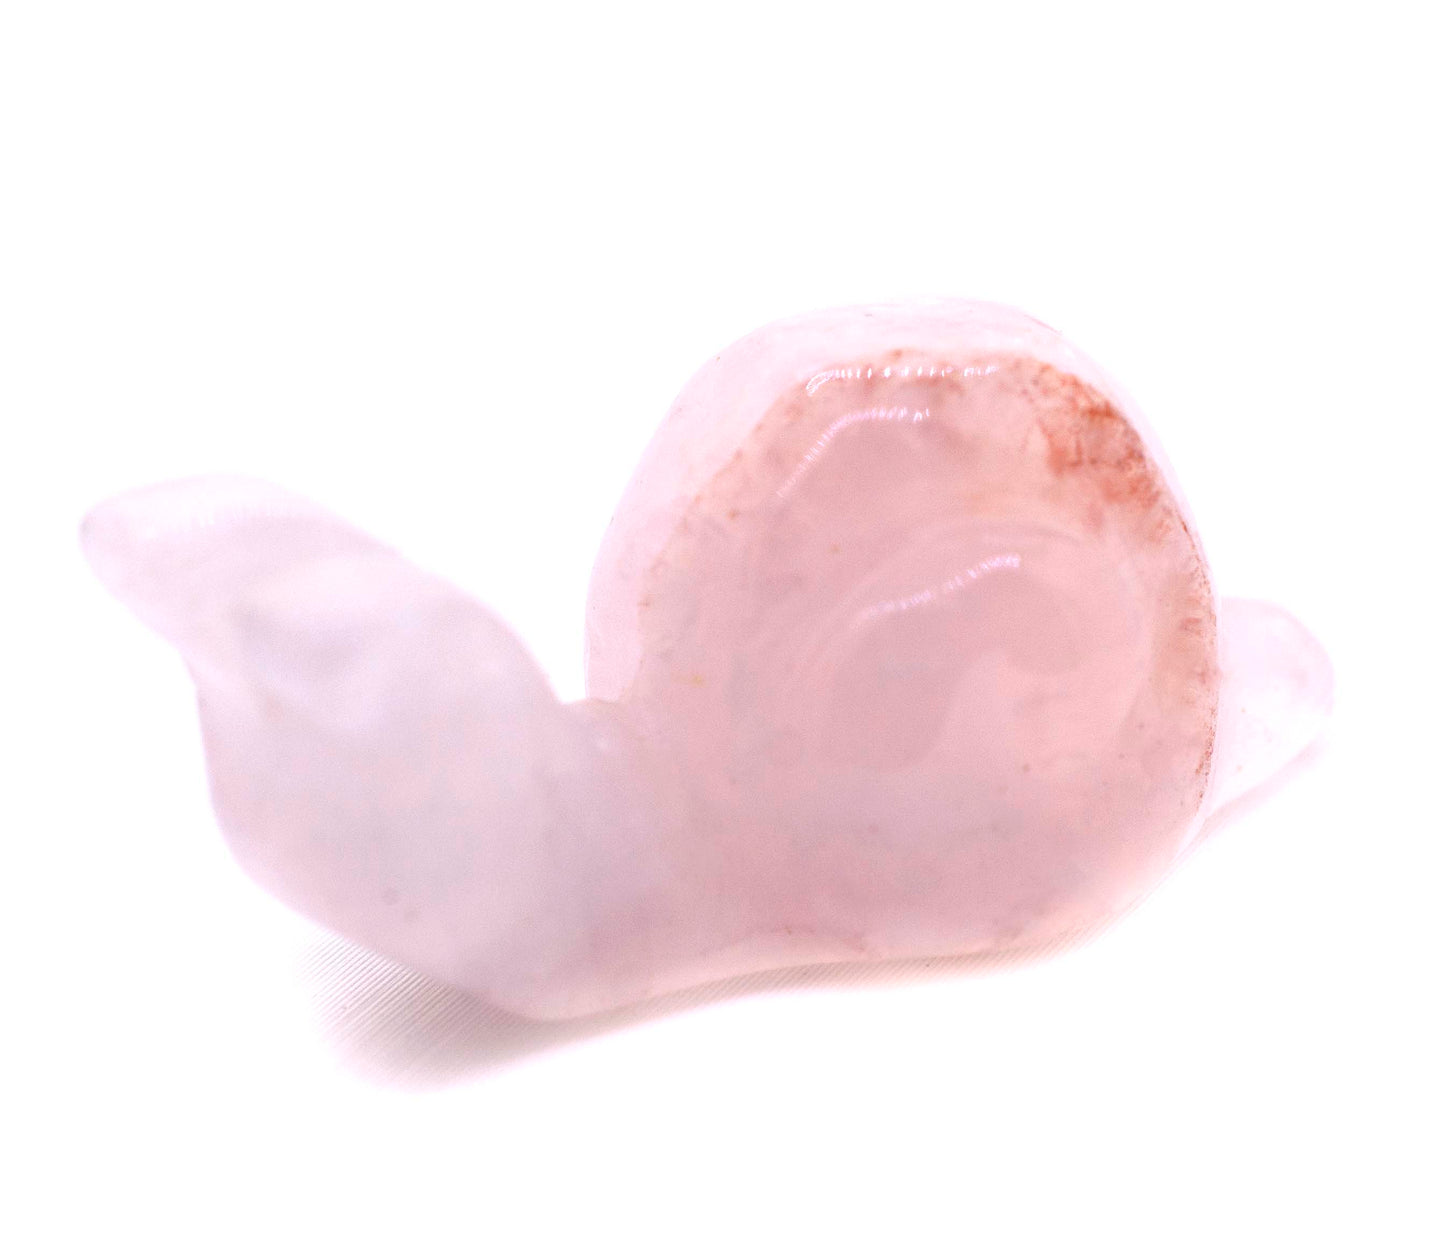 
                  
                    A small pink Snail Carved Gemstone Figure sitting on a white surface, perfect as a decor accent.
                  
                